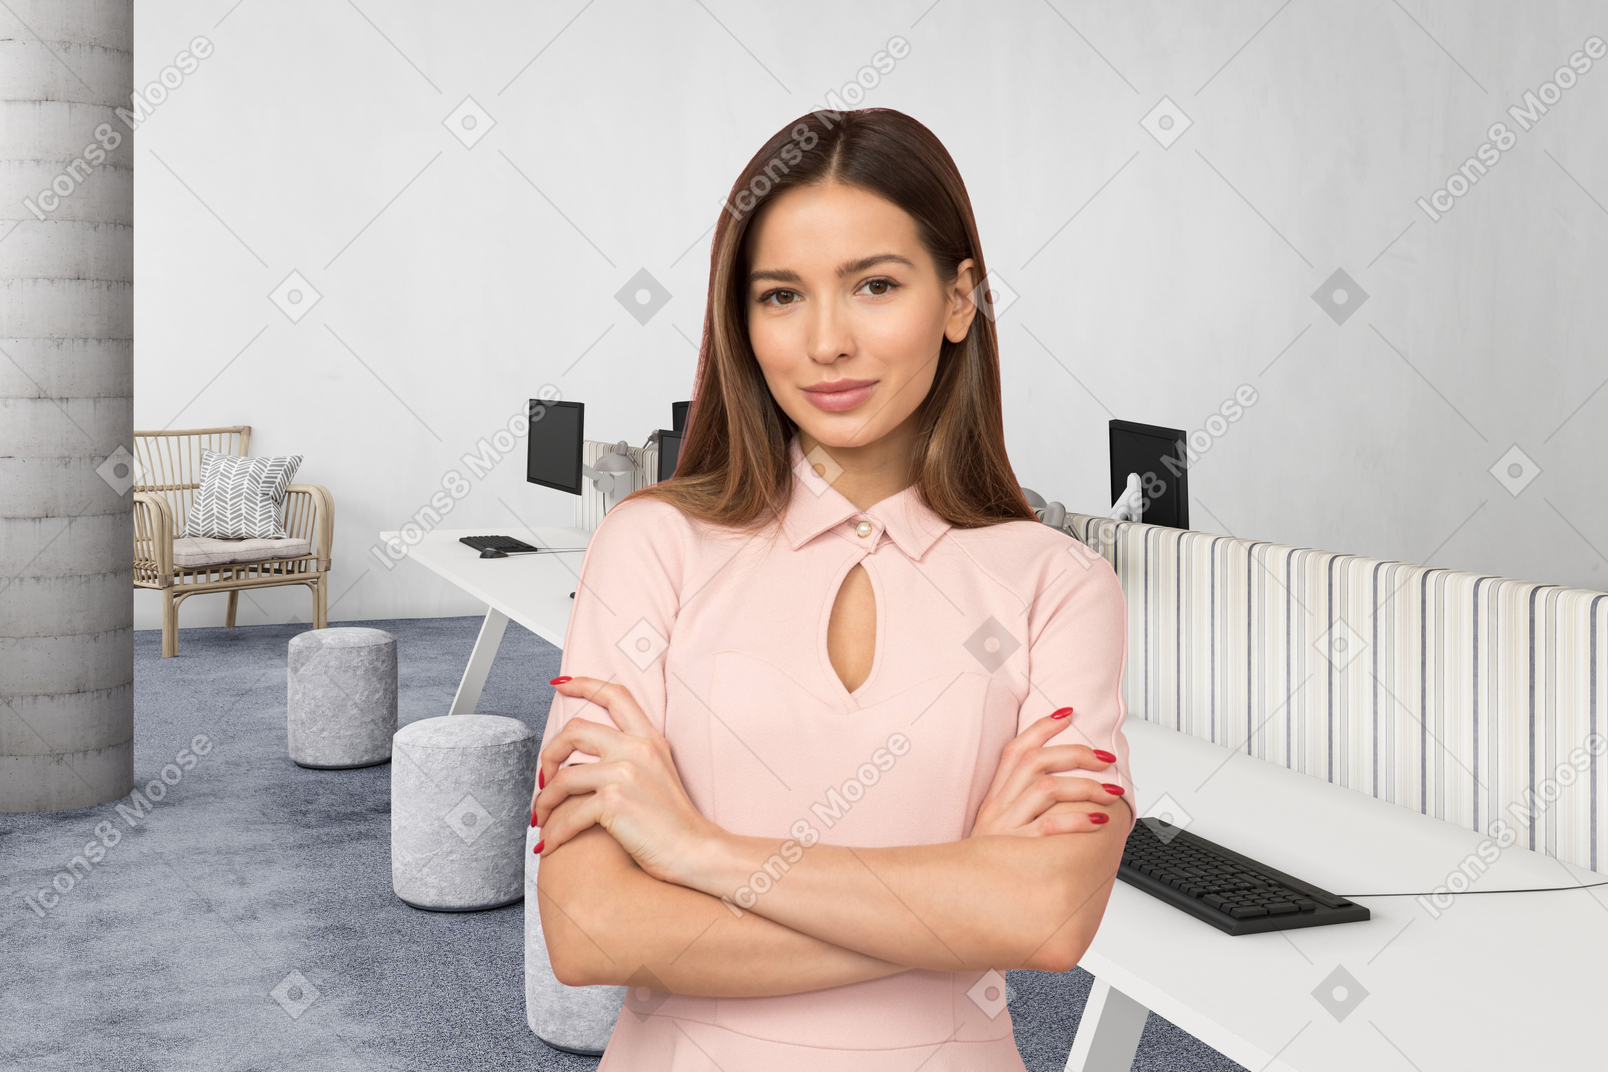 A young woman in a pink dress standing in an office